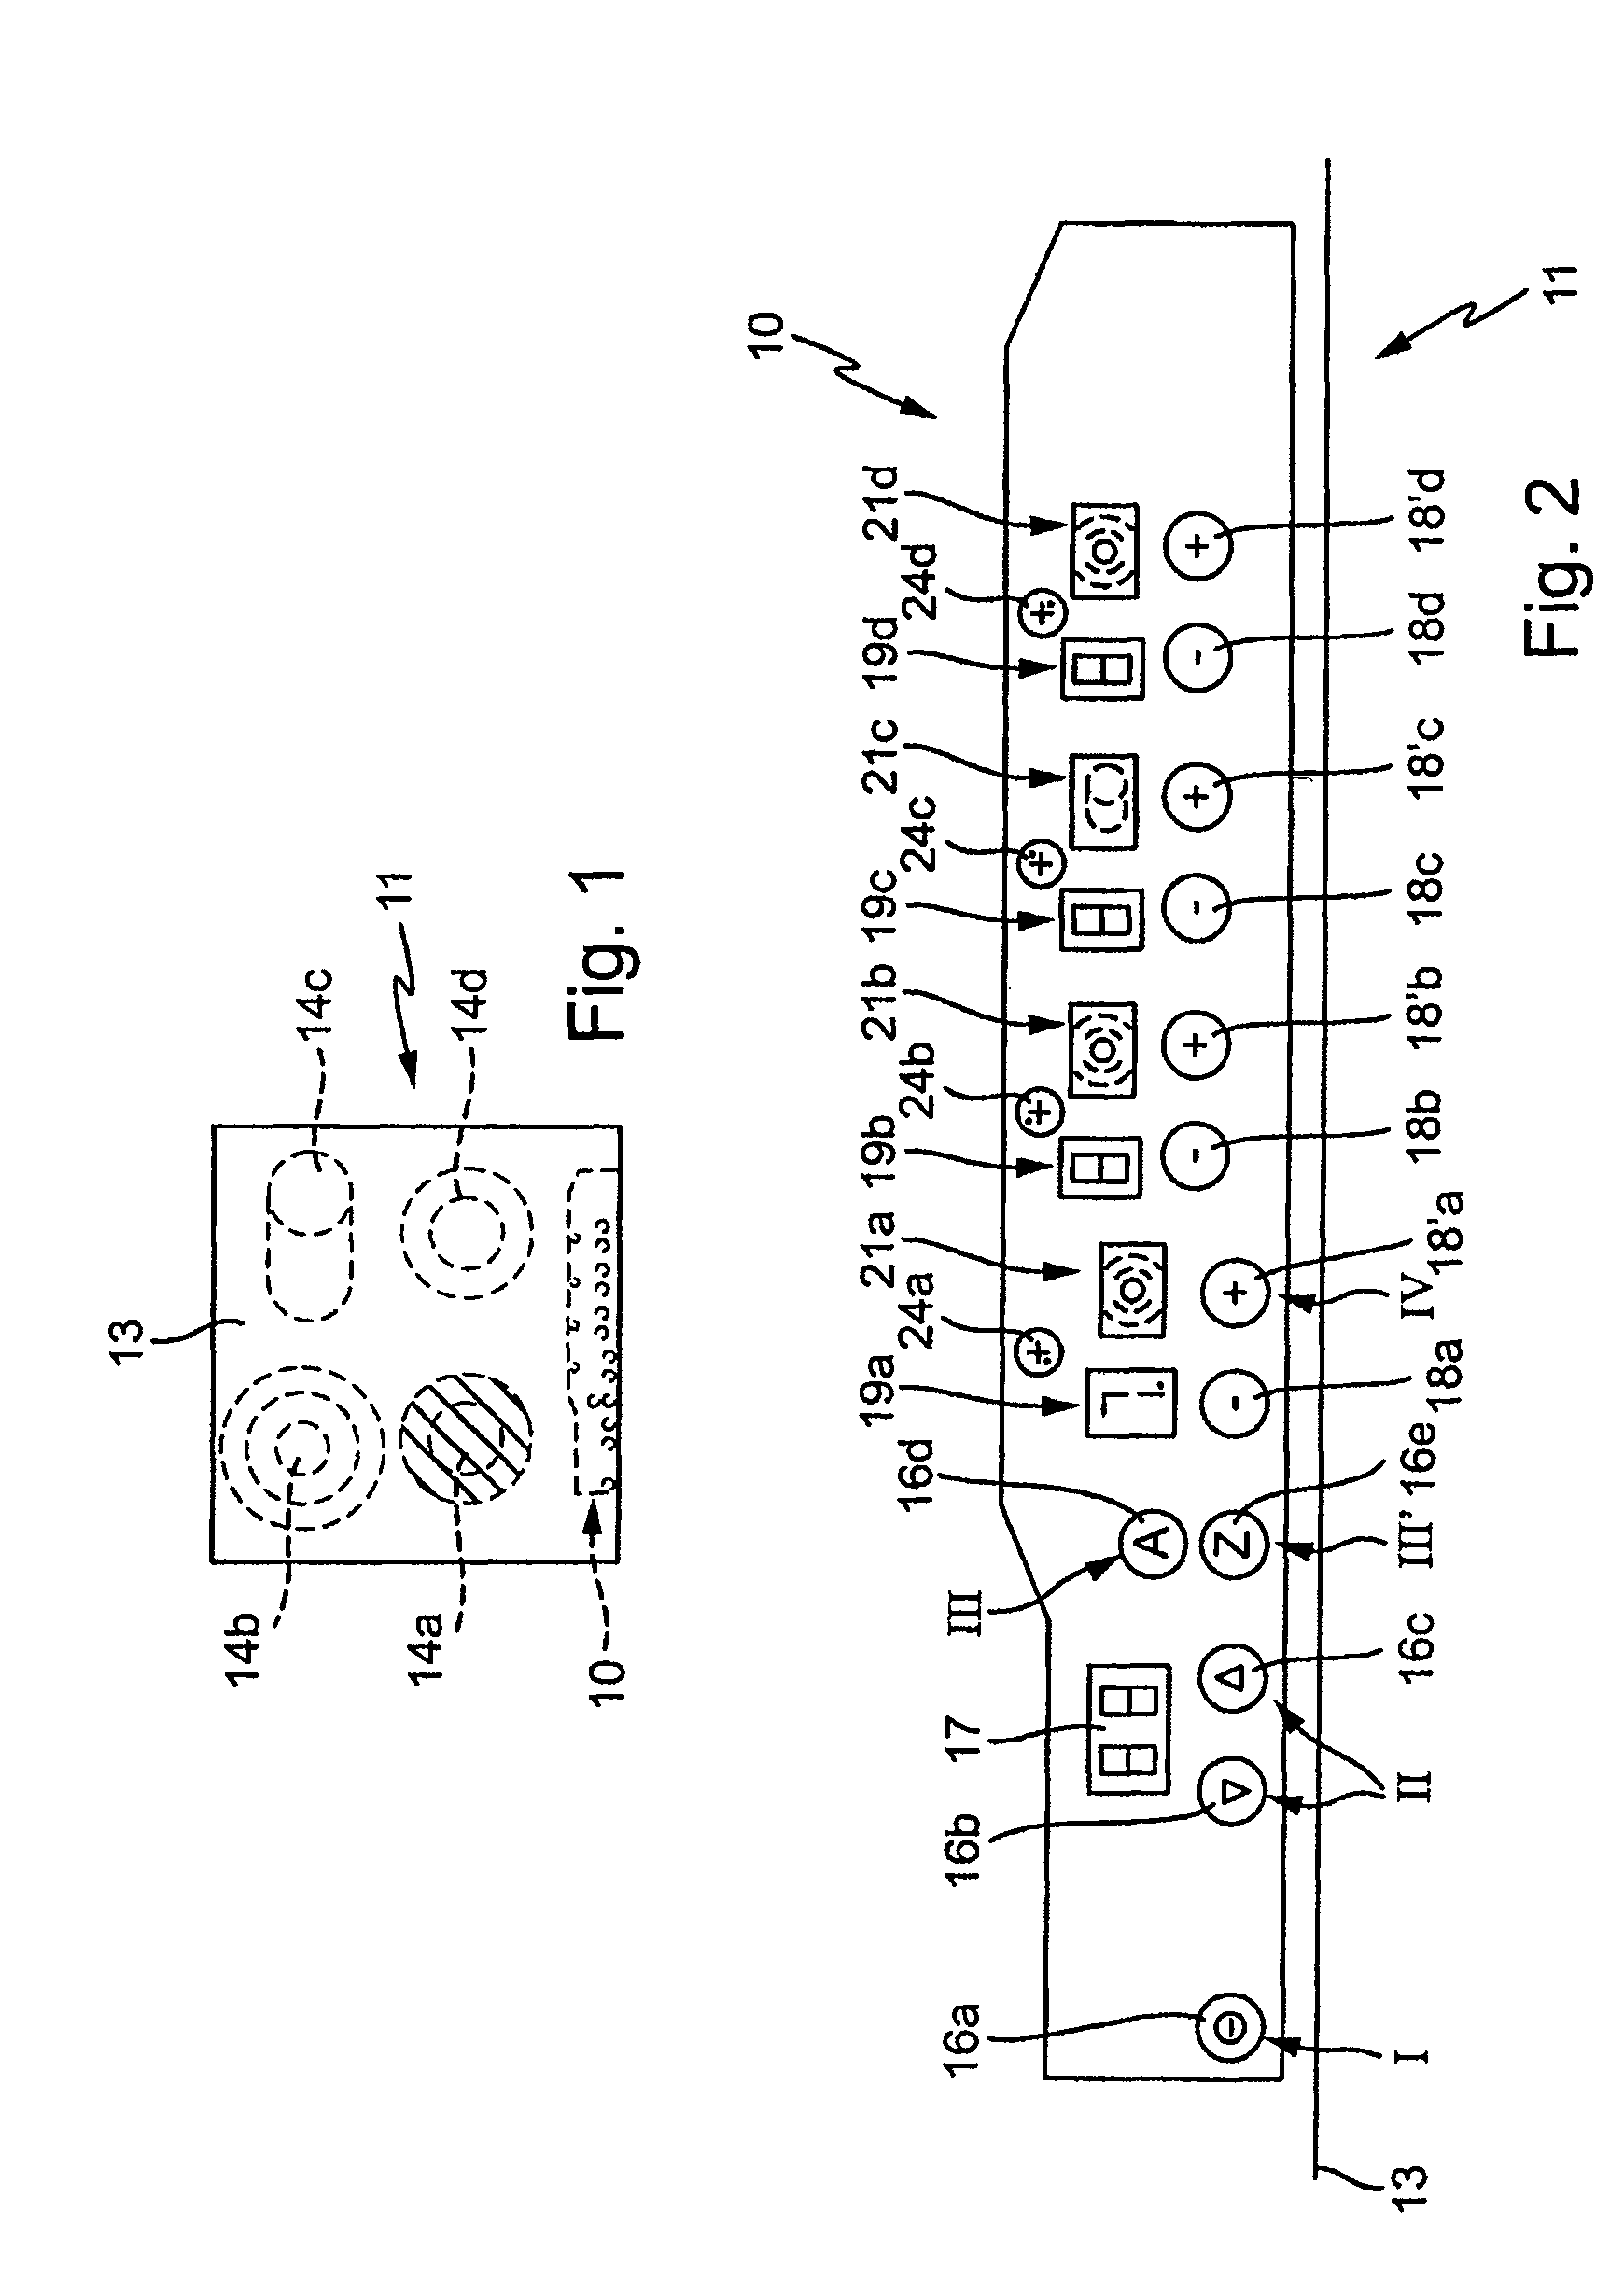 Method for operating a heating device of an electric heating appliance having a plurality of heating devices